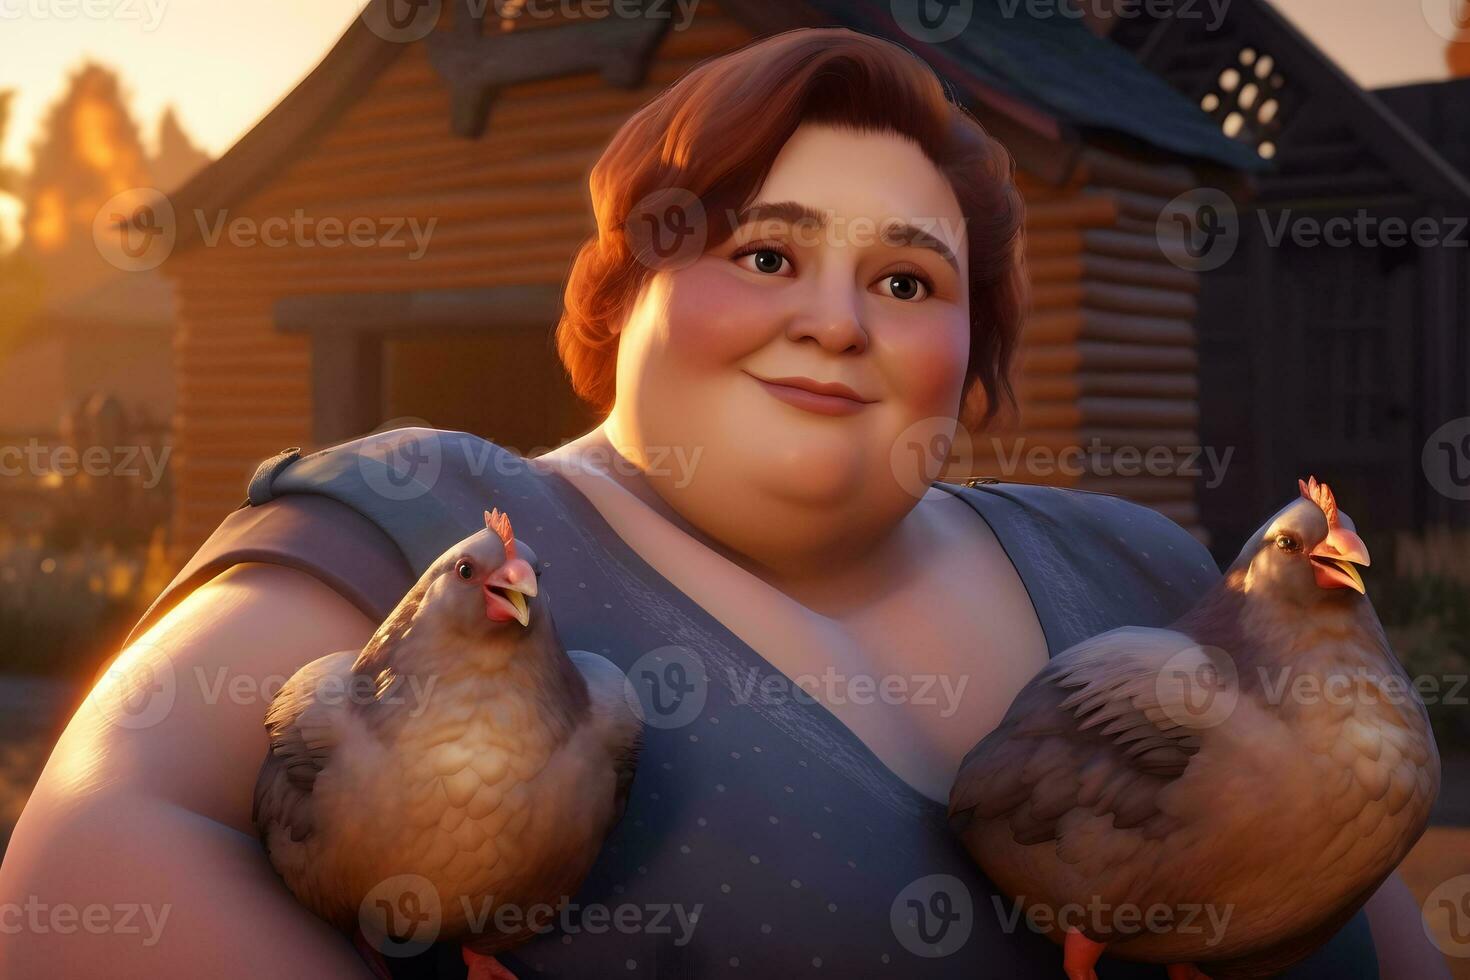 Woman and chickens in the village cartoon style. Neural network AI generated photo